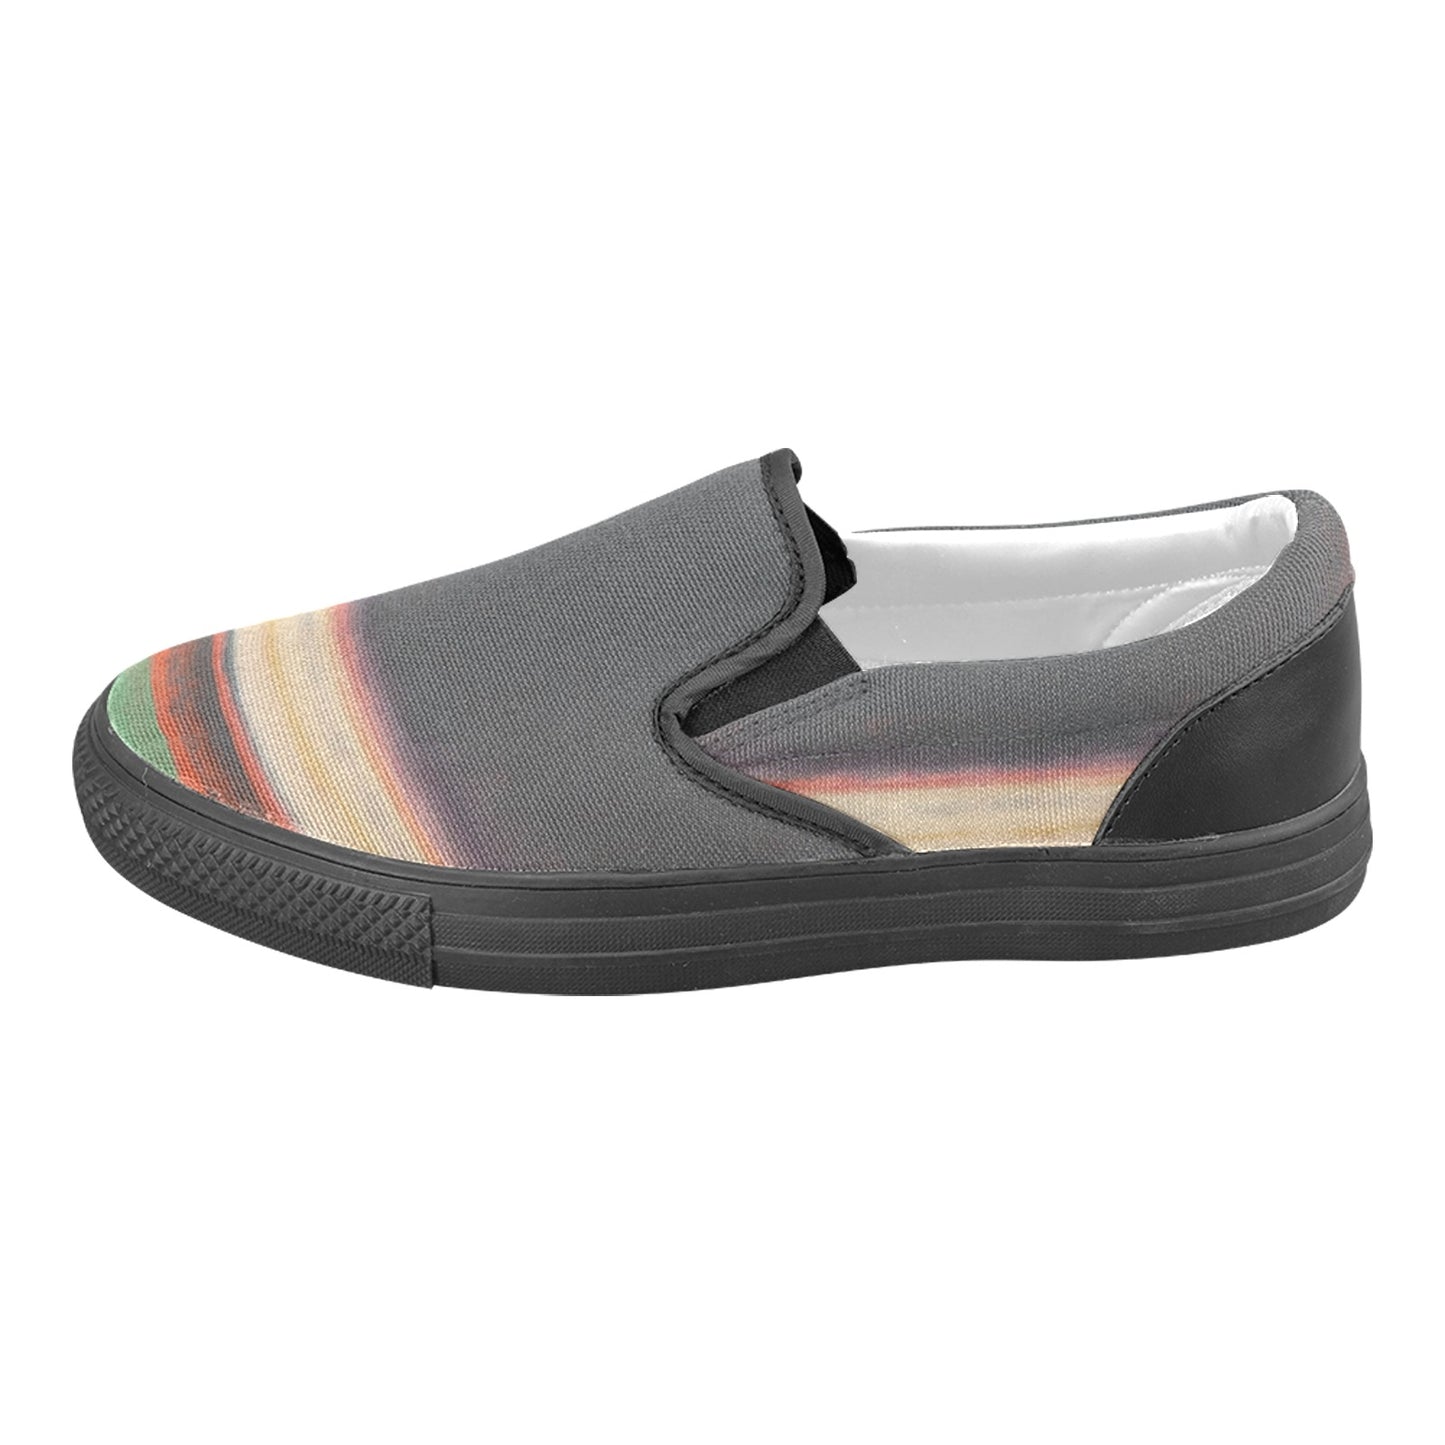 a gray slip on shoe with multicolored stripes